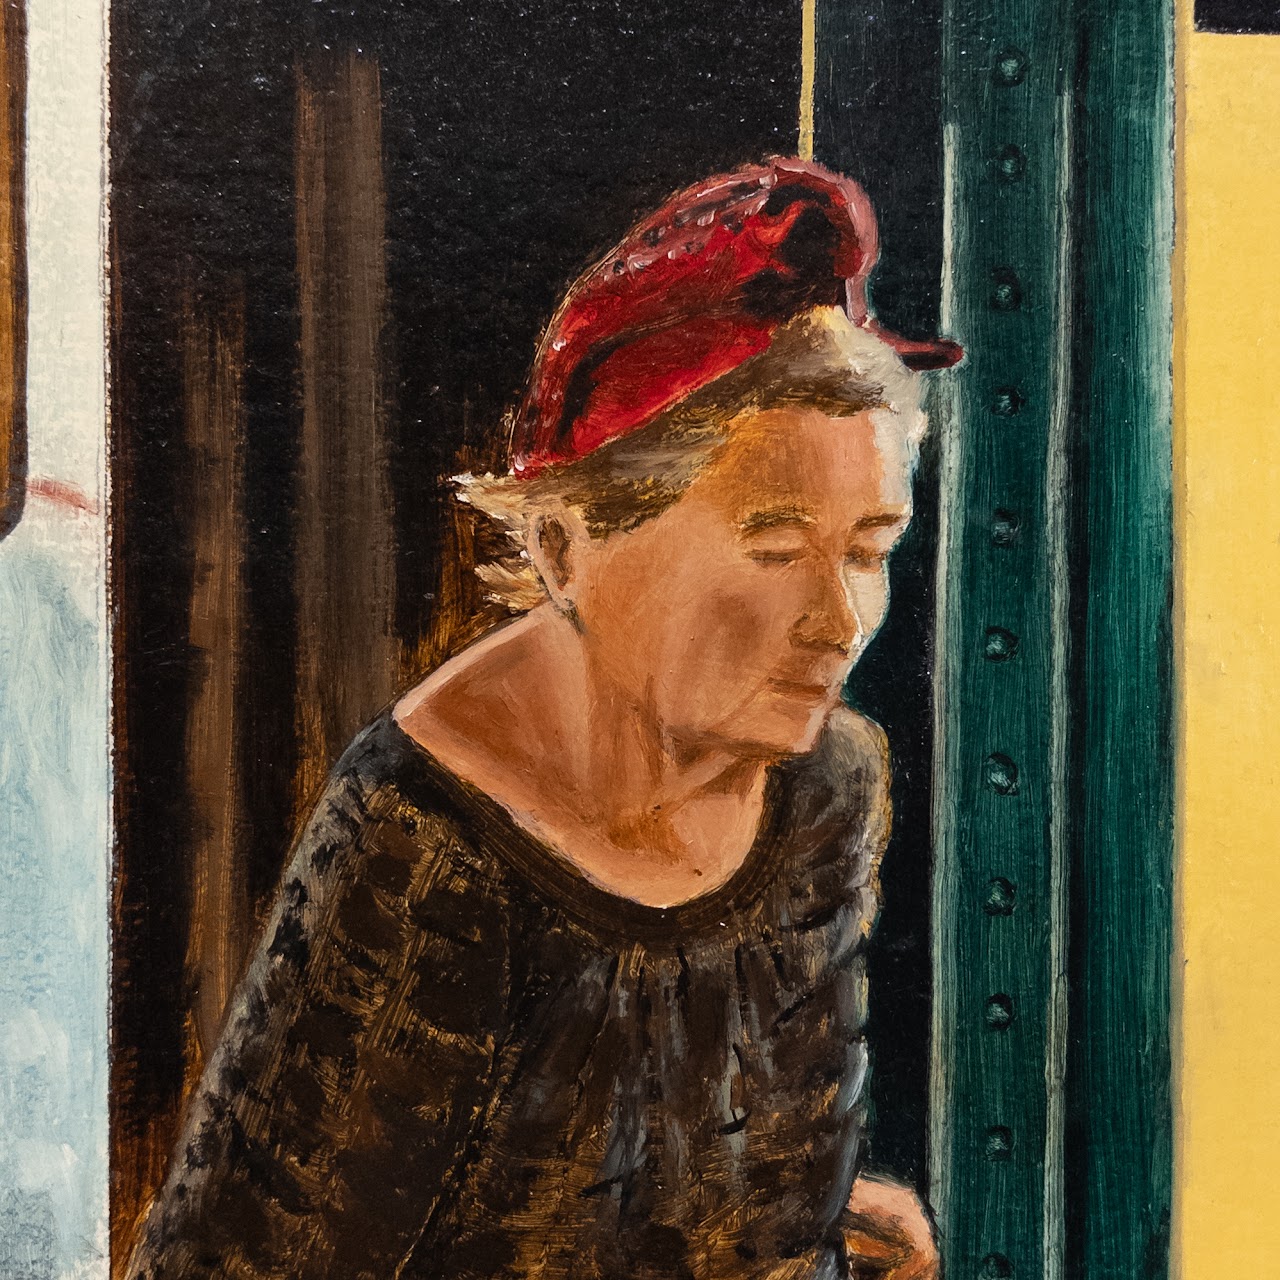 Harold Rein "Lady in the Subway" Painting on Hardboard